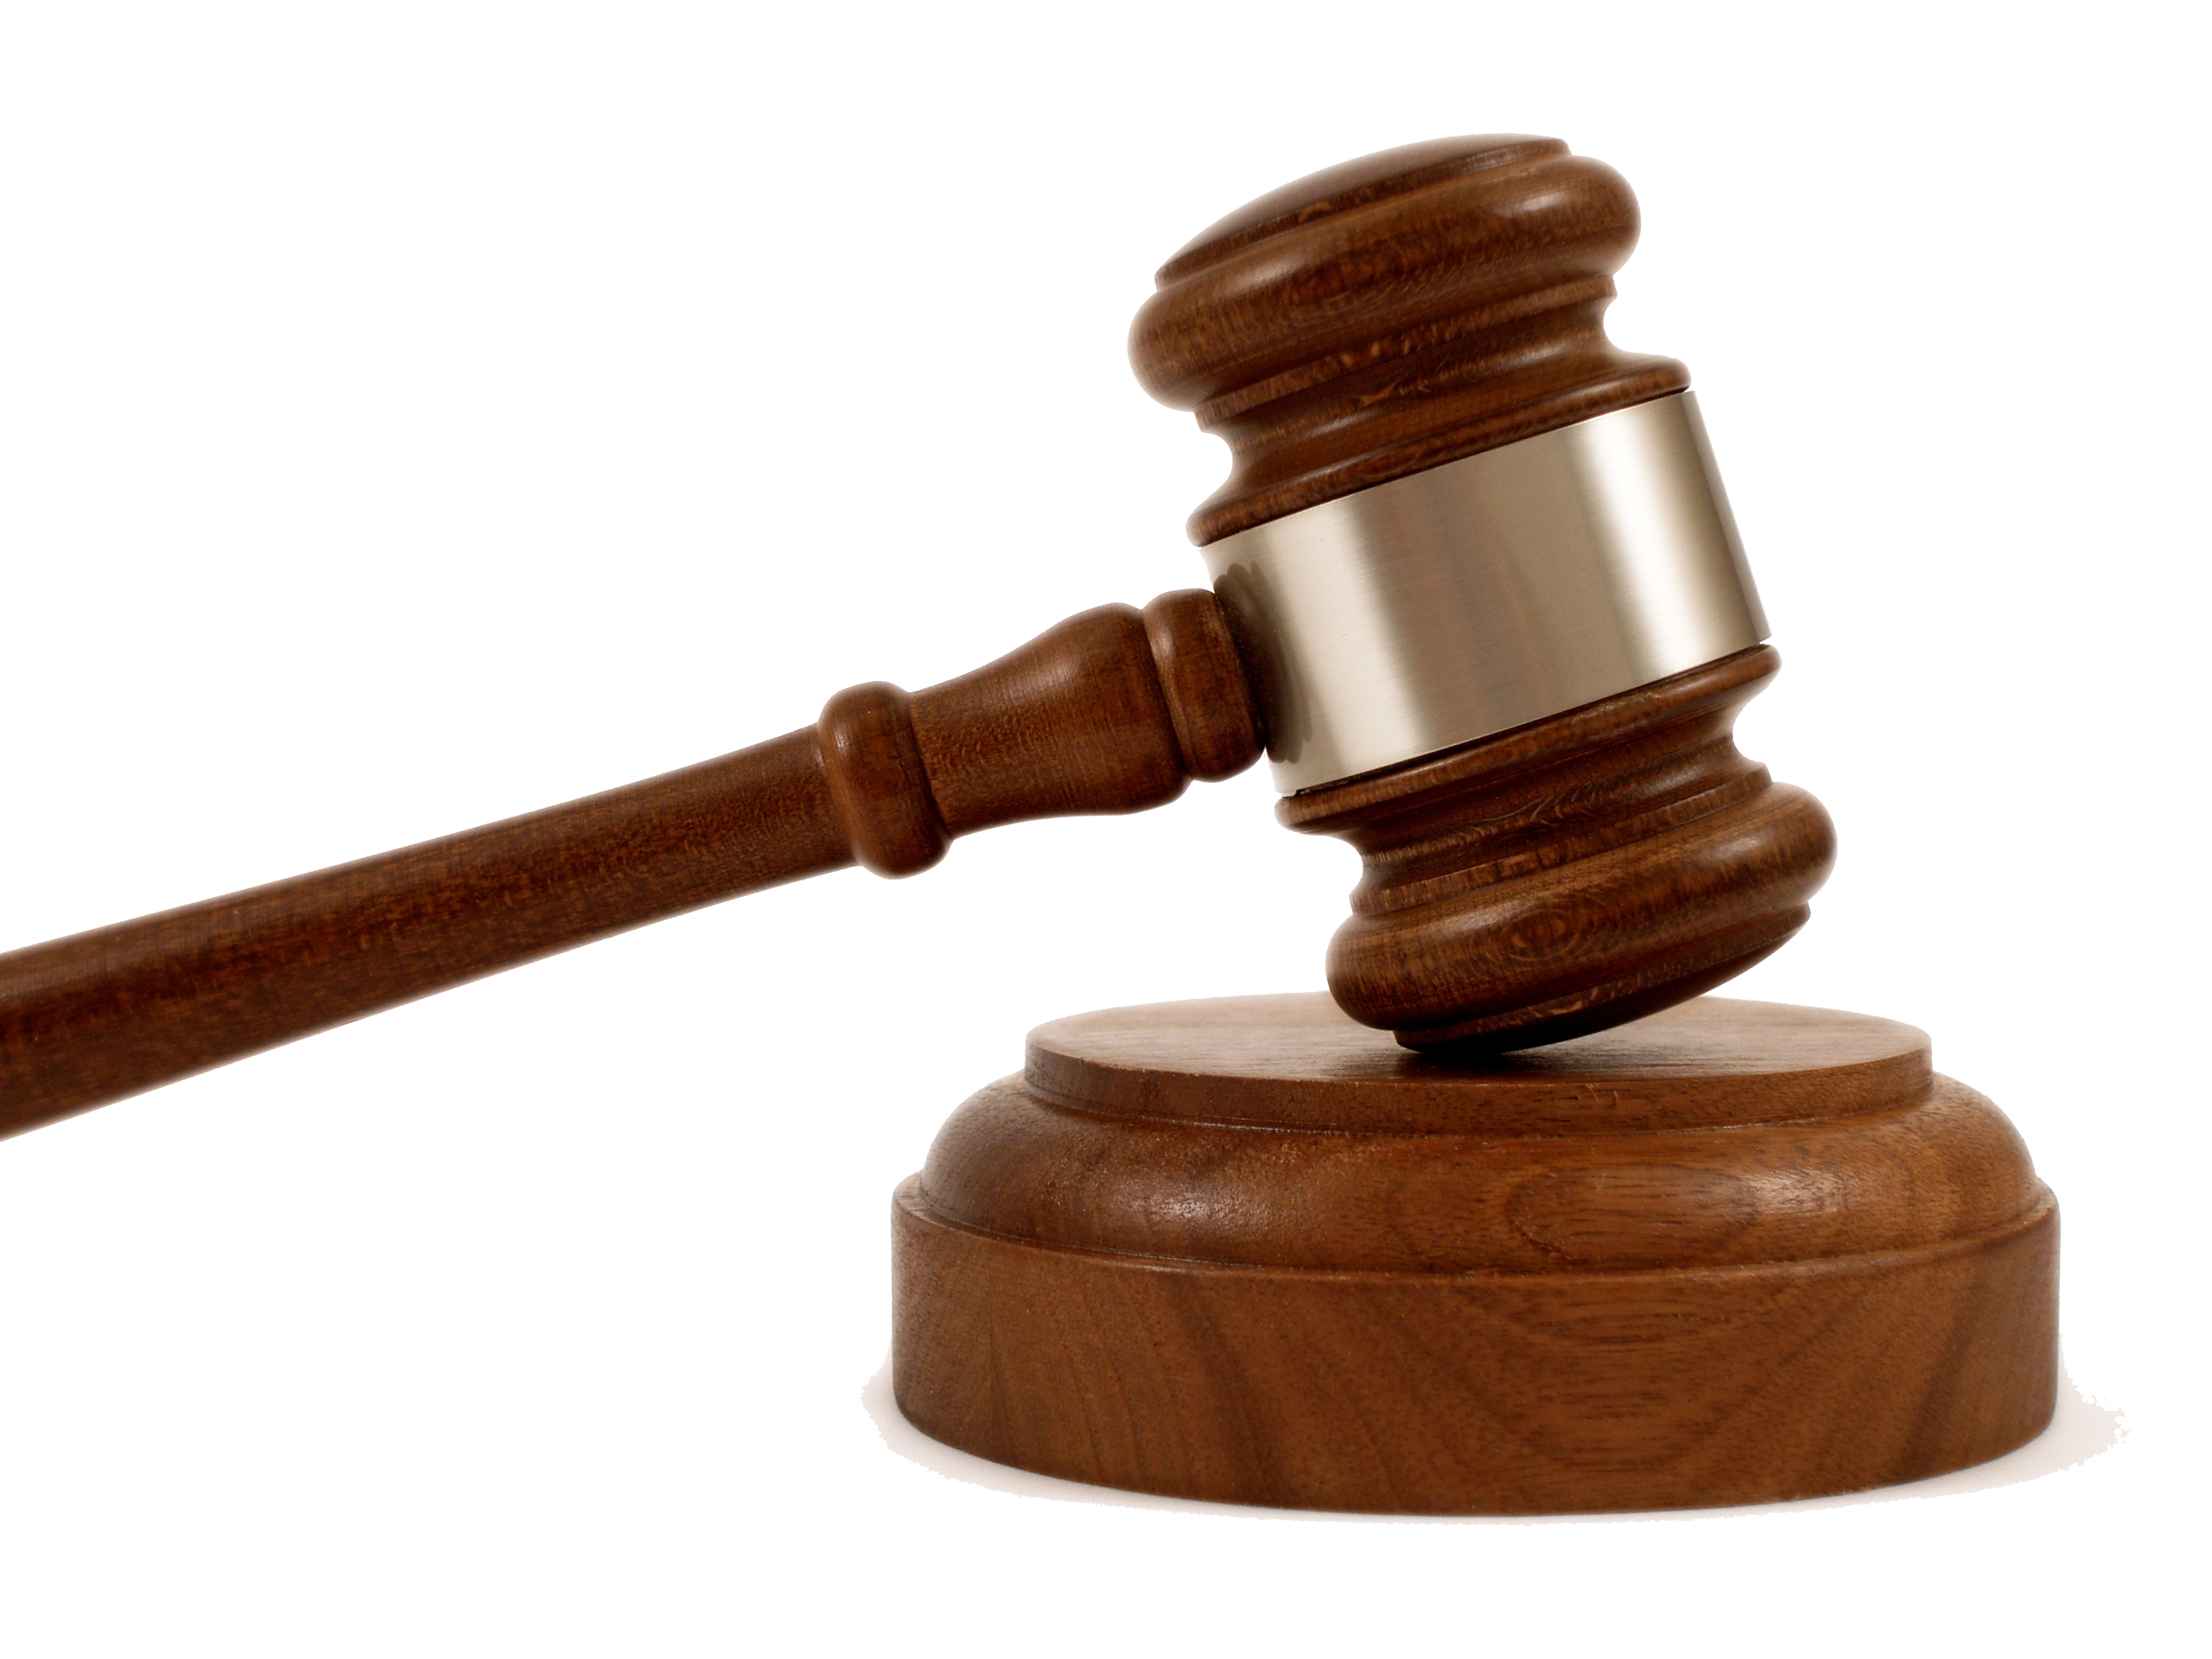 Png transparent images court. Gavel clipart federal courts